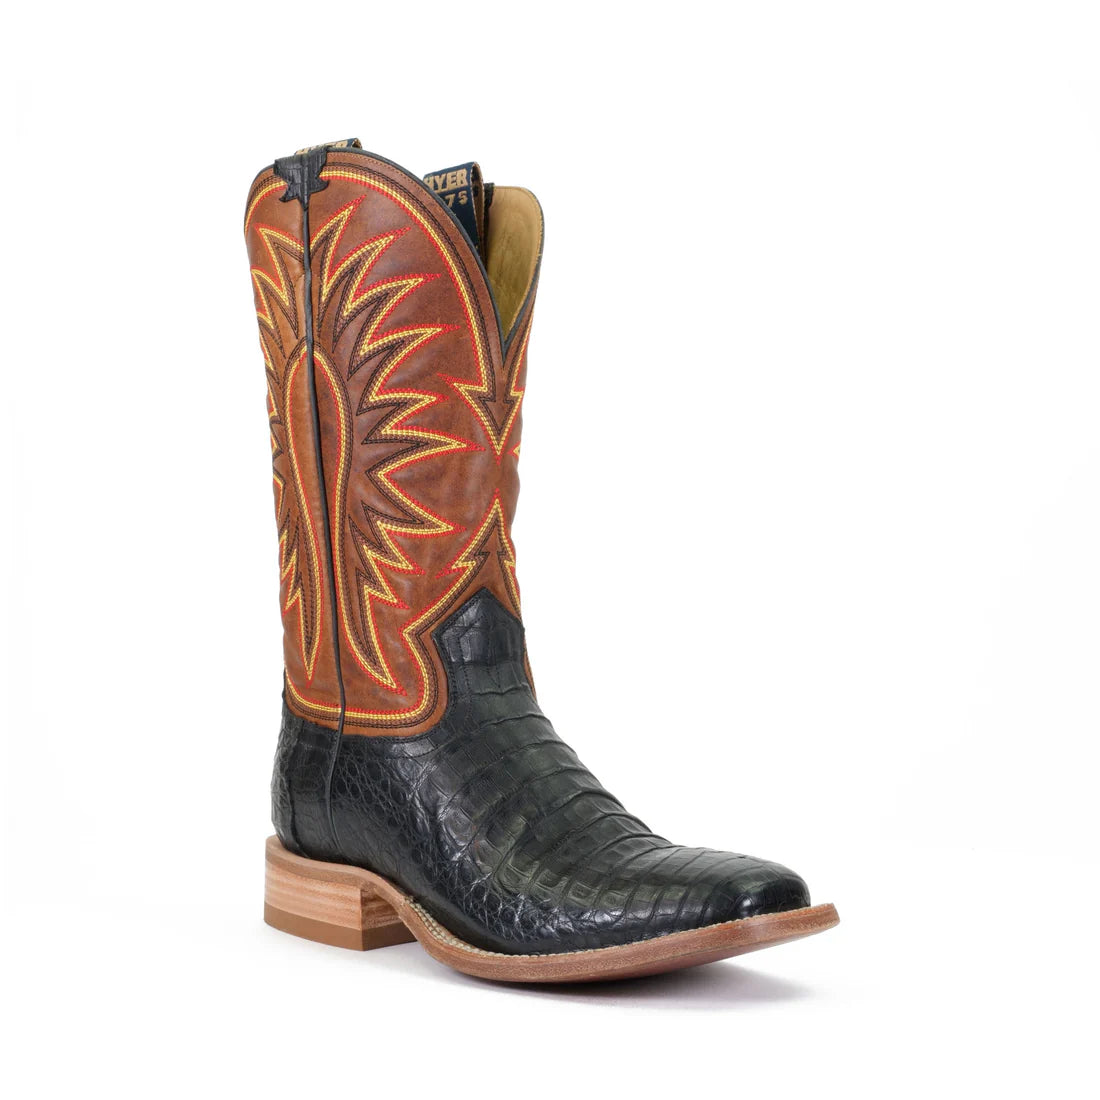 Hyer Mens Big Bow Caiman Boot